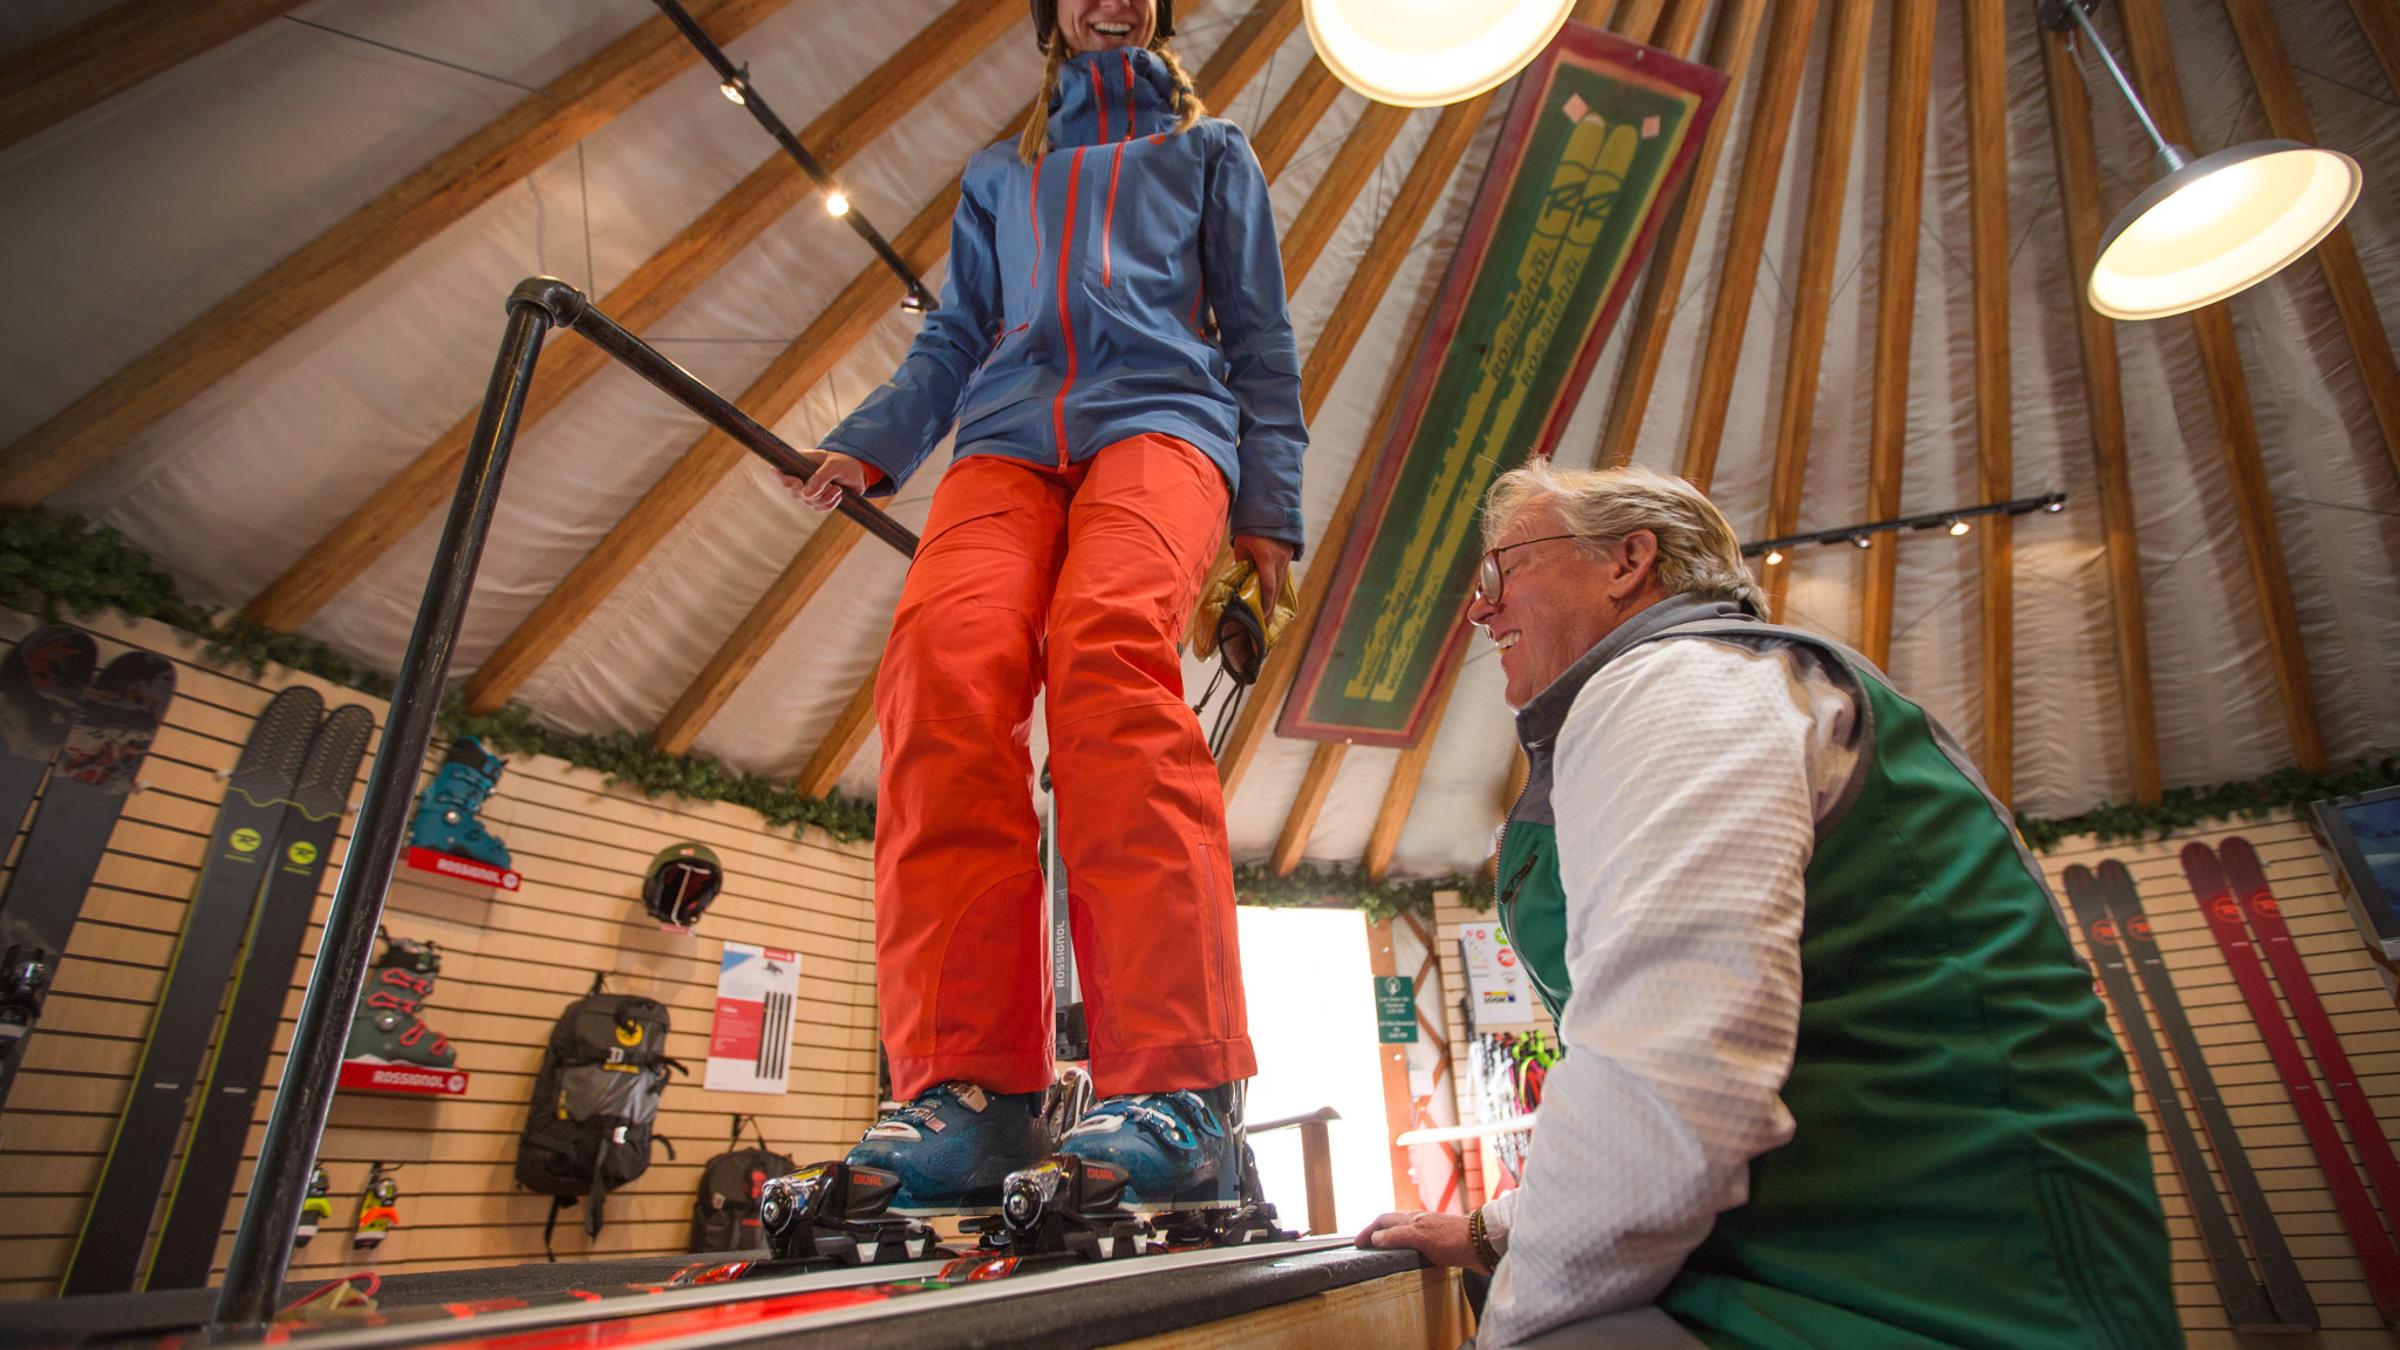 A guest getting fitted in Rossignol Skis